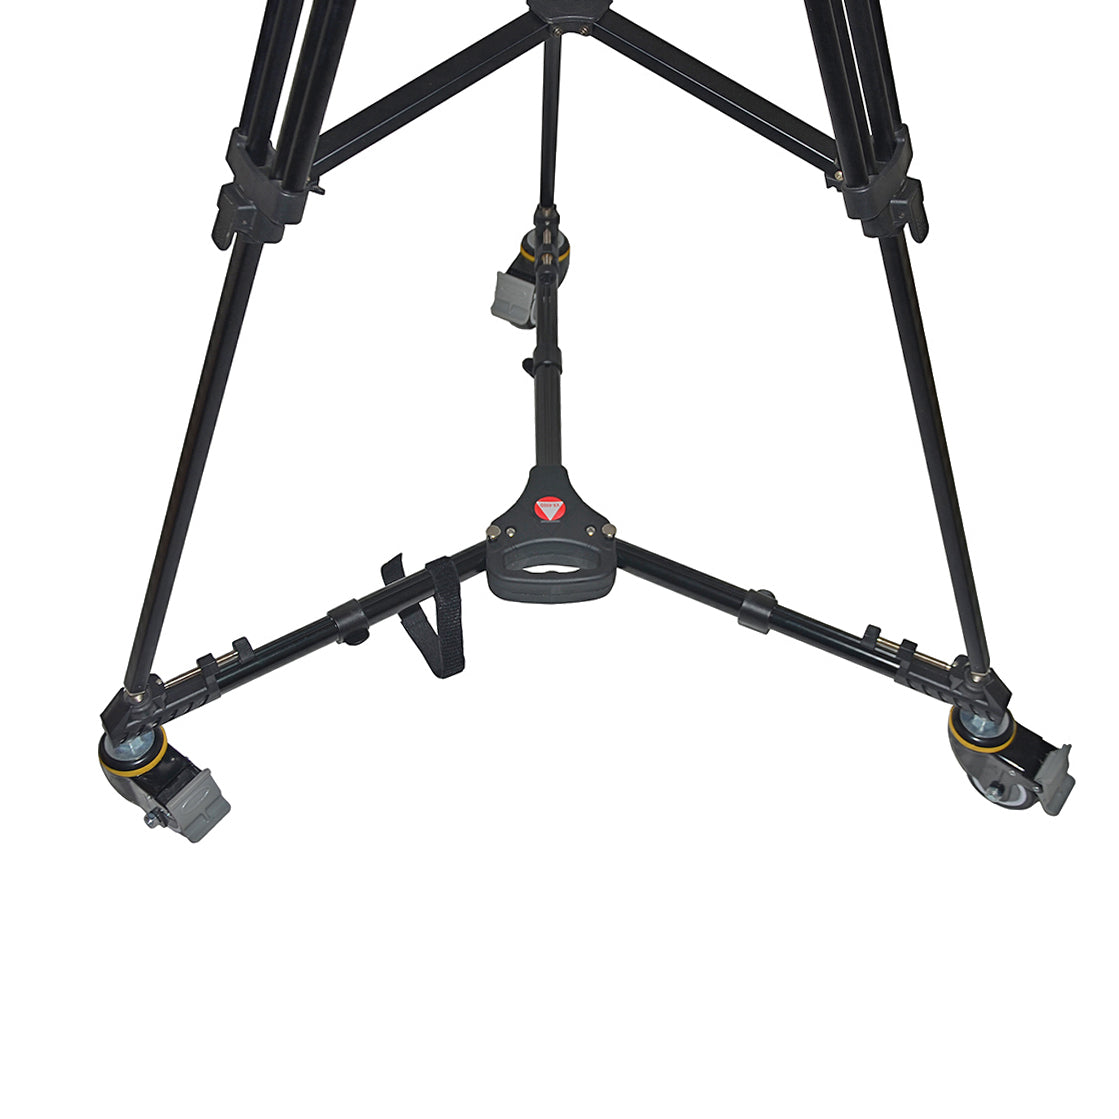 Kingjoy VX-600 heavy-duty rock solid tripod dolly with rubber wheels and adjustable leg mounts for Canon Nikon Sony DSLR Cameras